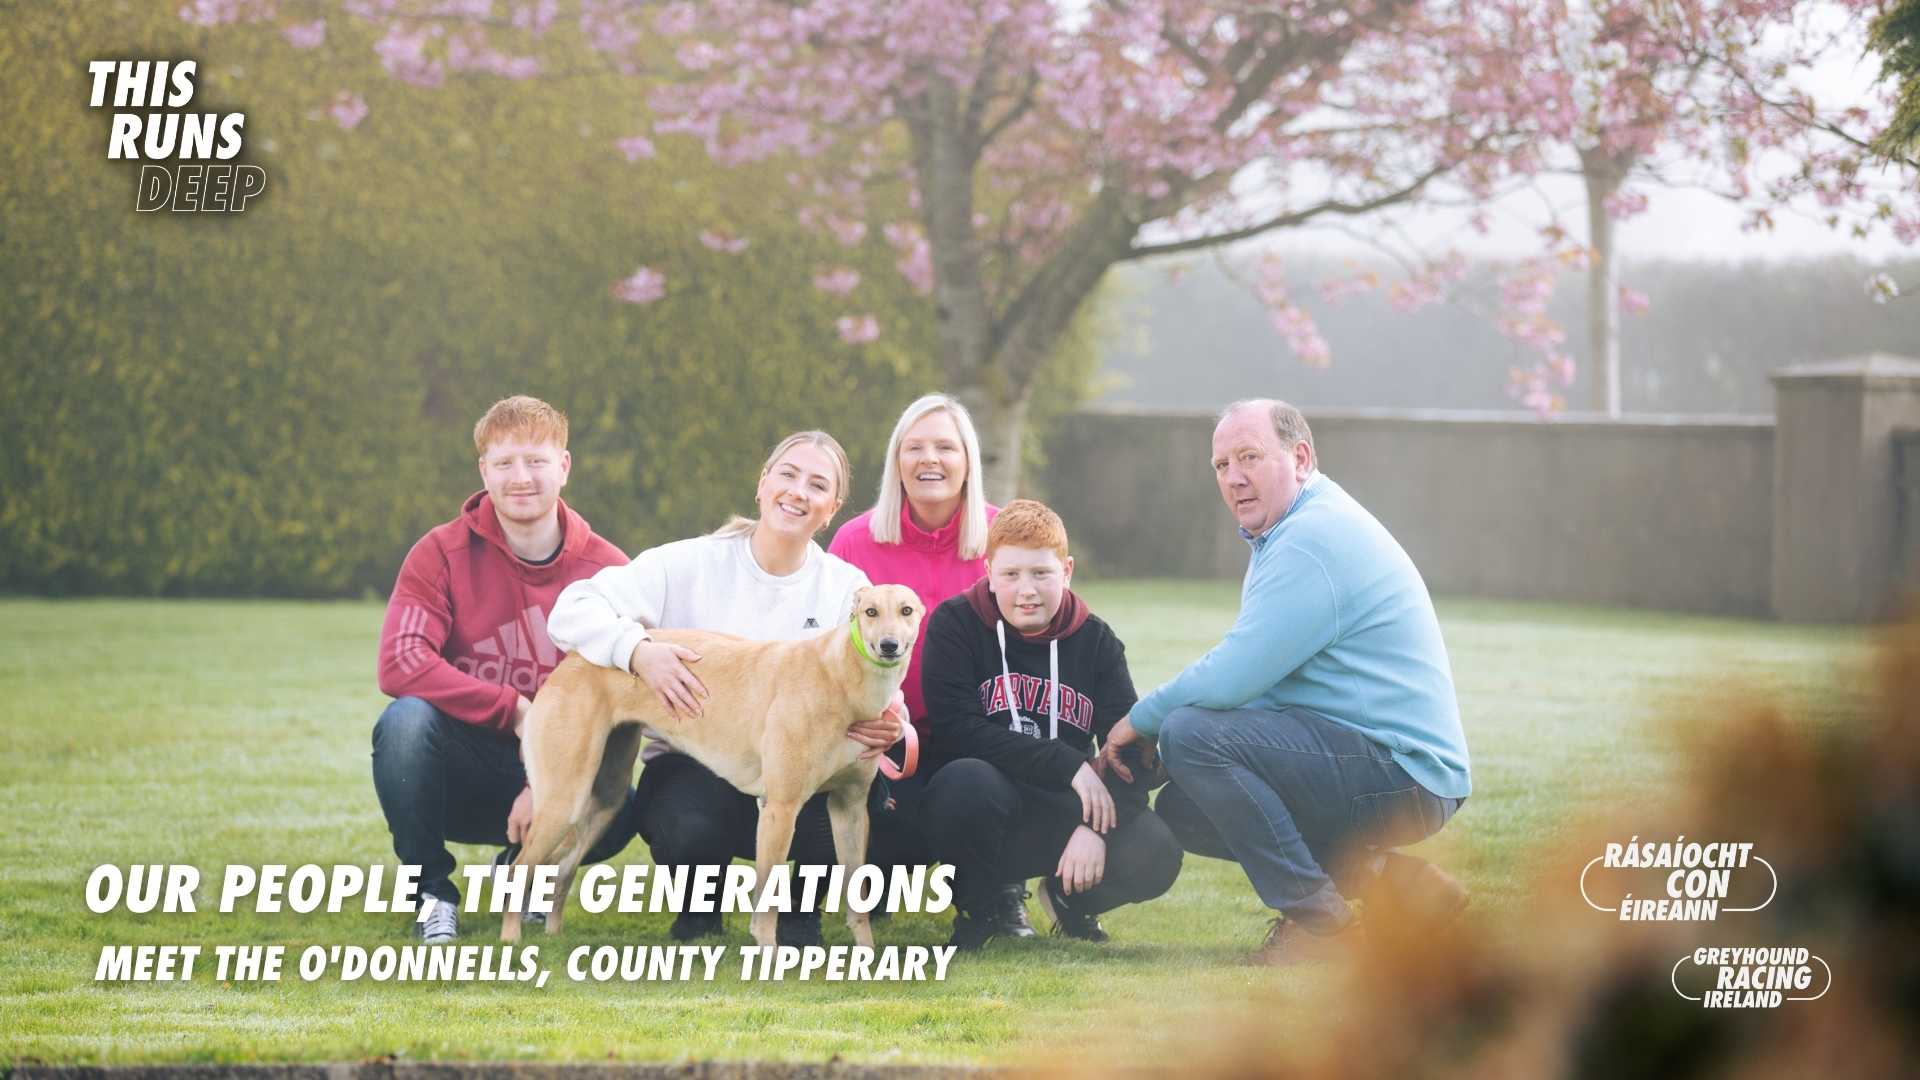 Meet the O'Donnell family from County Tipperary - Jim, Shari-Anne & their 3 children Cian, Aoife & James, a family with a deep love of greyhounds